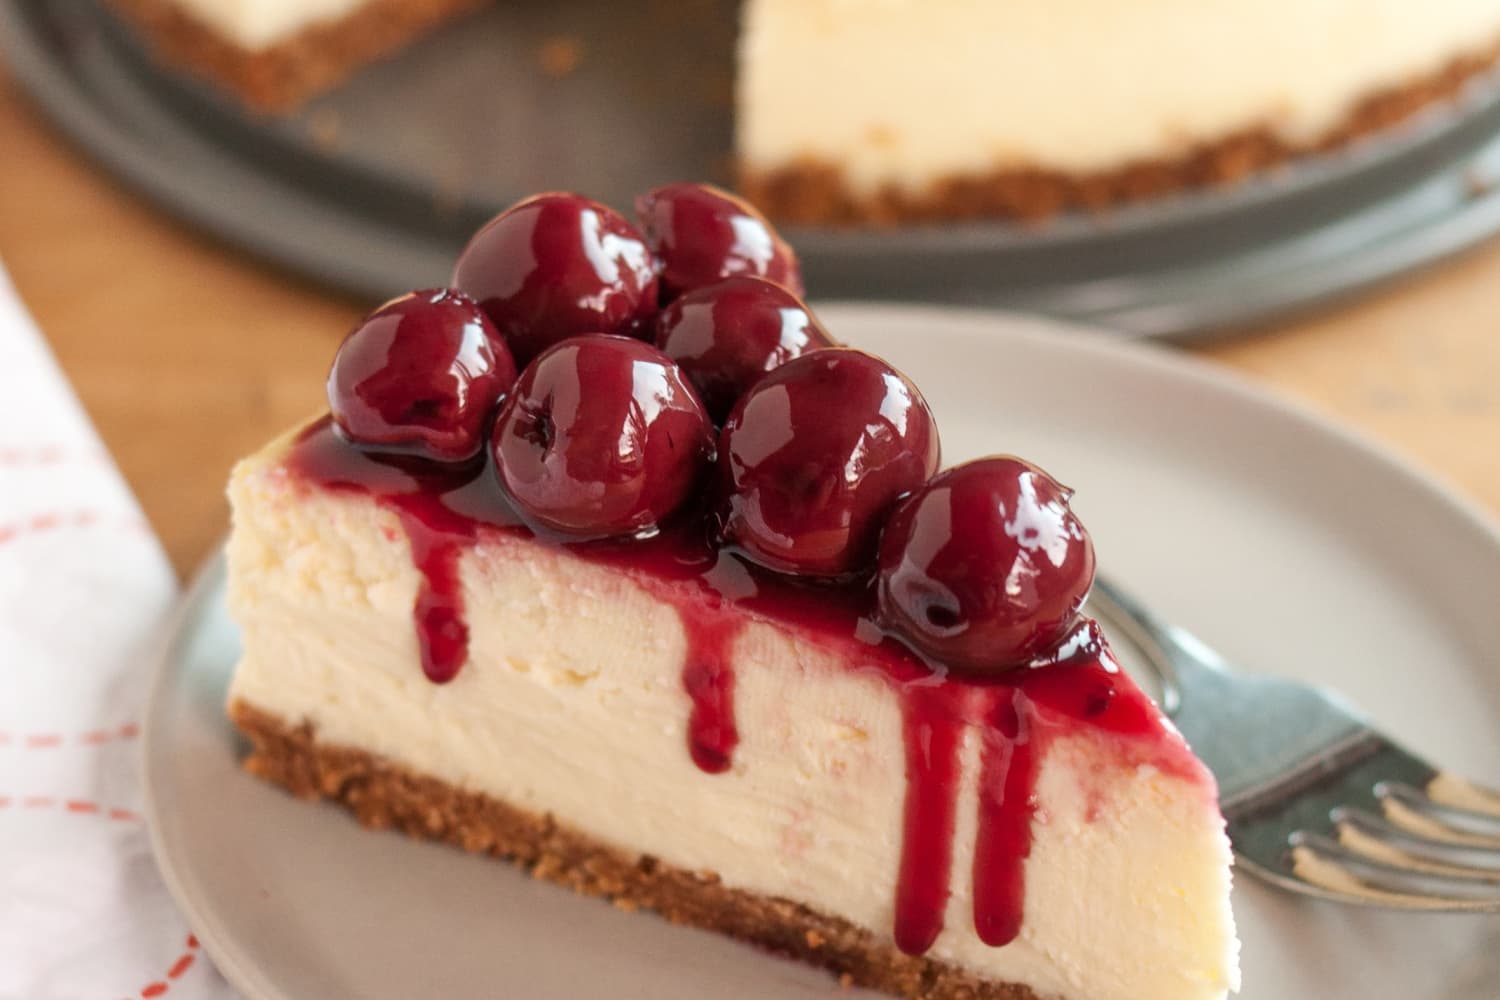 How to Make Perfect Cheesecake (Step-by-Step Recipe)